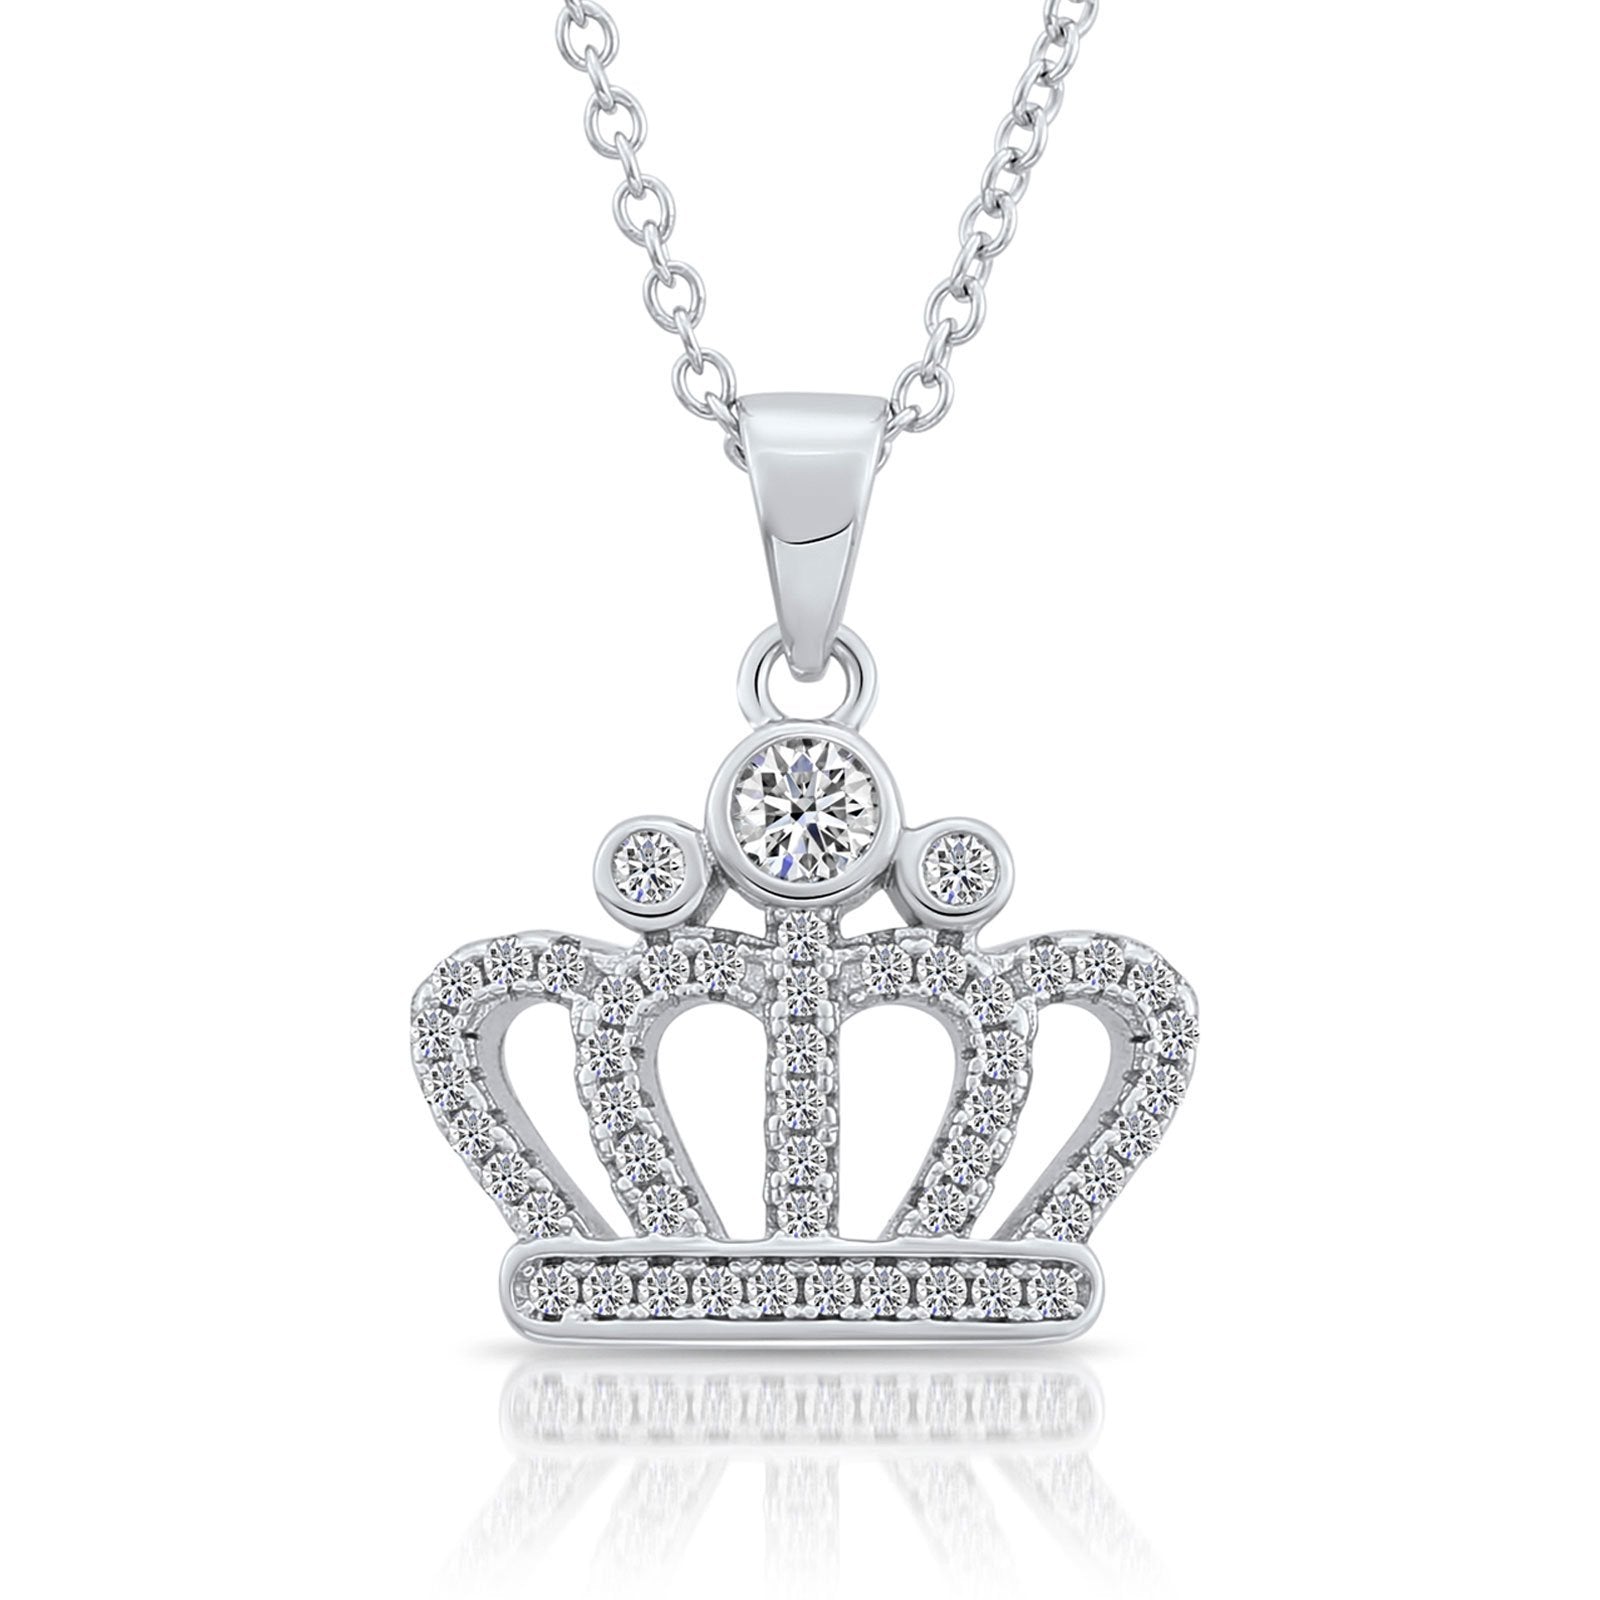 Royal Crown Charm Necklace with Cz in Sterling Silver